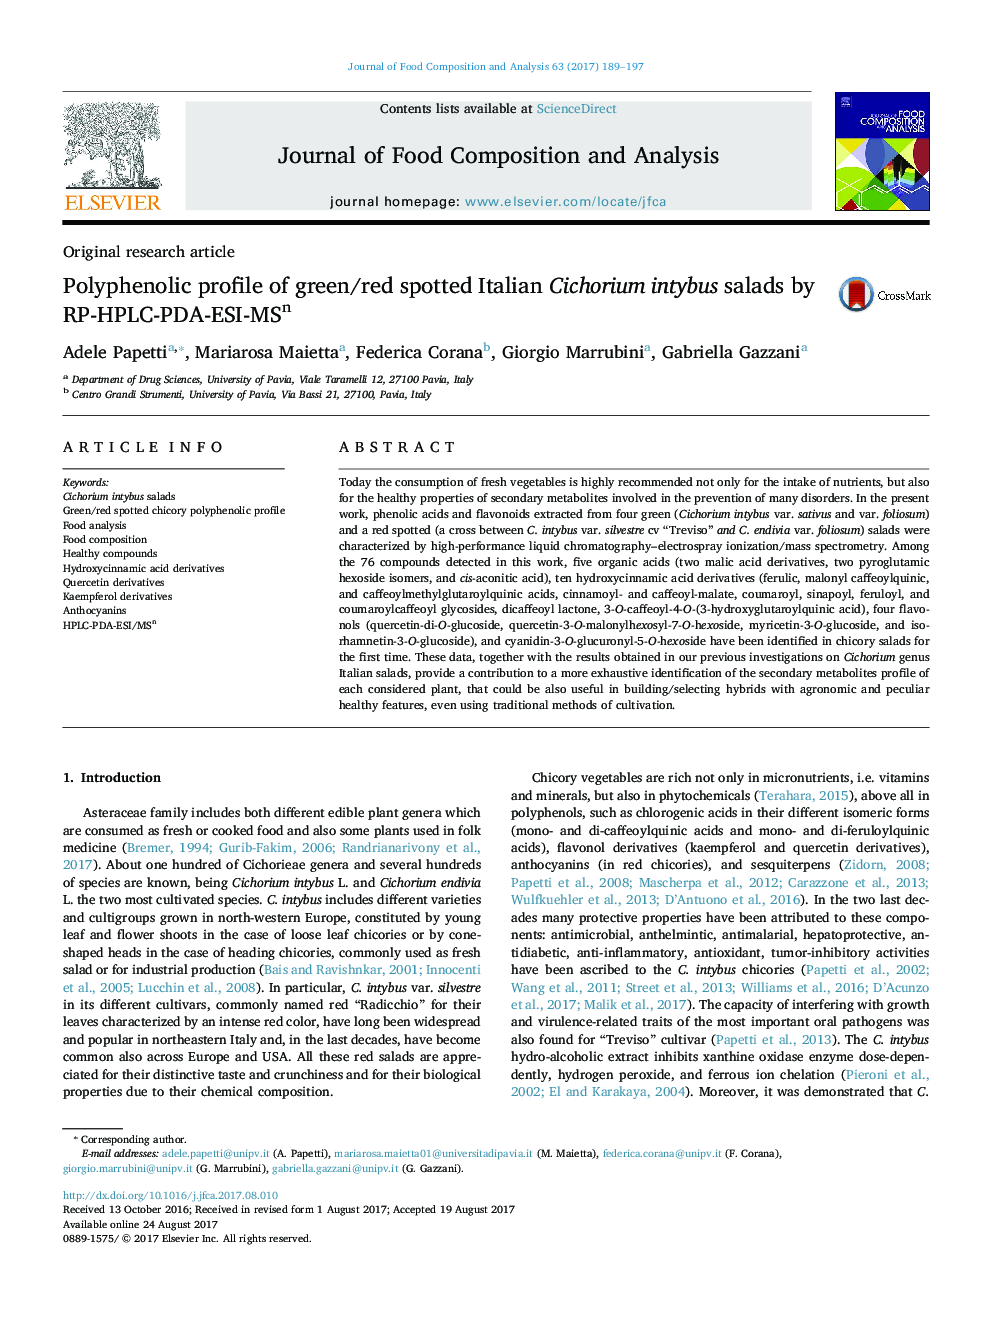 Original research articlePolyphenolic profile of green/red spotted Italian Cichorium intybus salads by RP-HPLC-PDA-ESI-MSn